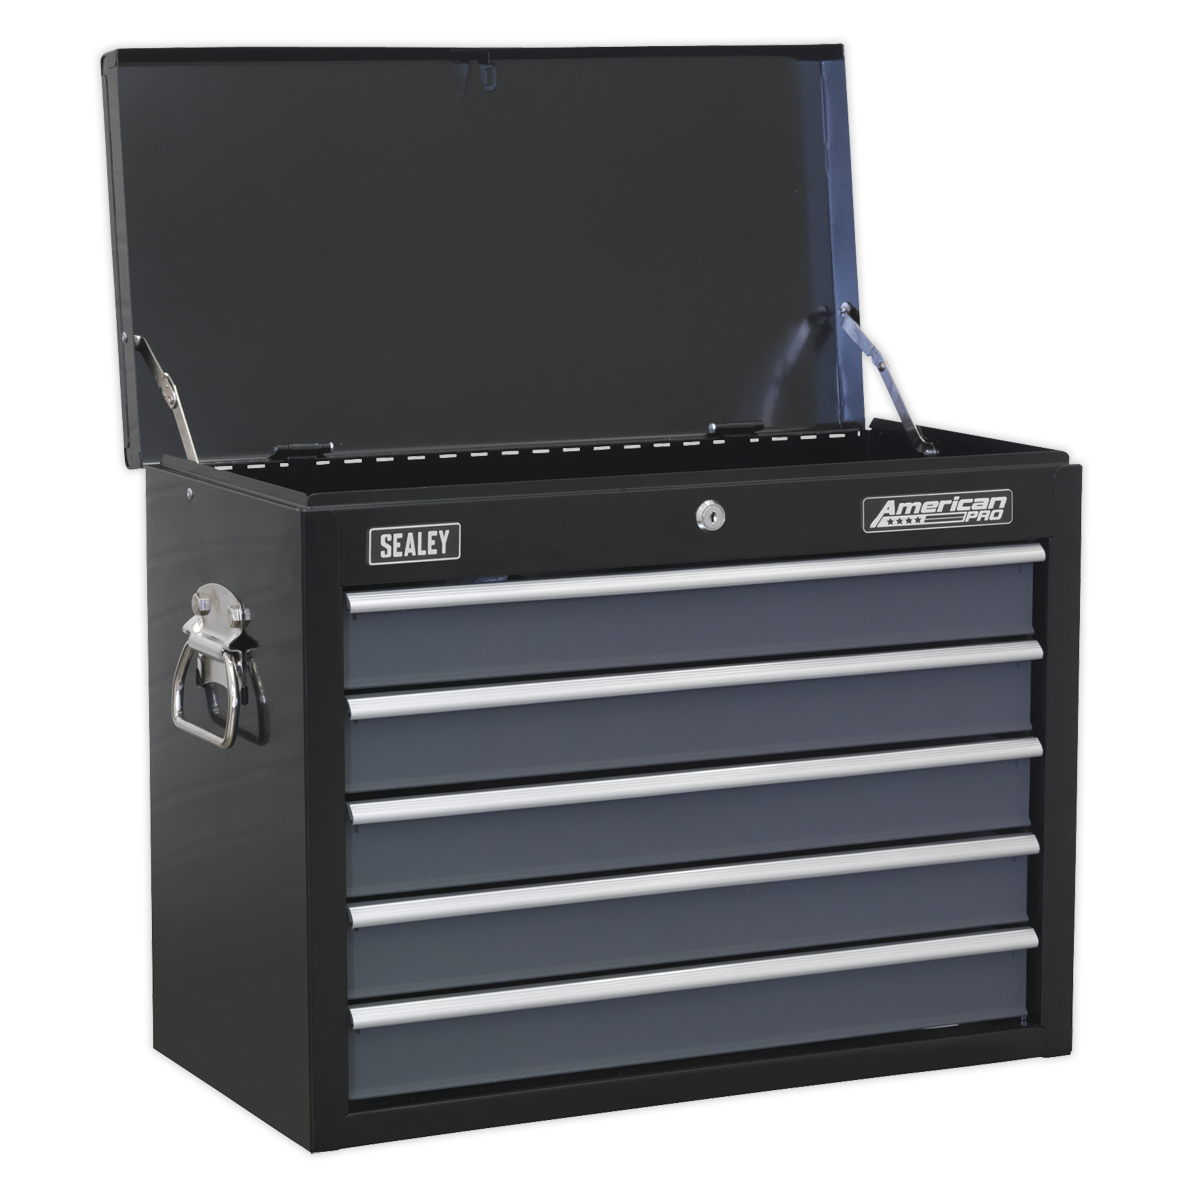 Sealey Topchest 5 Drawer with Ball Bearing Slides - Black/Grey AP3505TB | Features drop-down carry handles, smooth ball bearing drawer slides, cylinder lock and steel bars that can be locked into place to keep drawers shut for additional security.